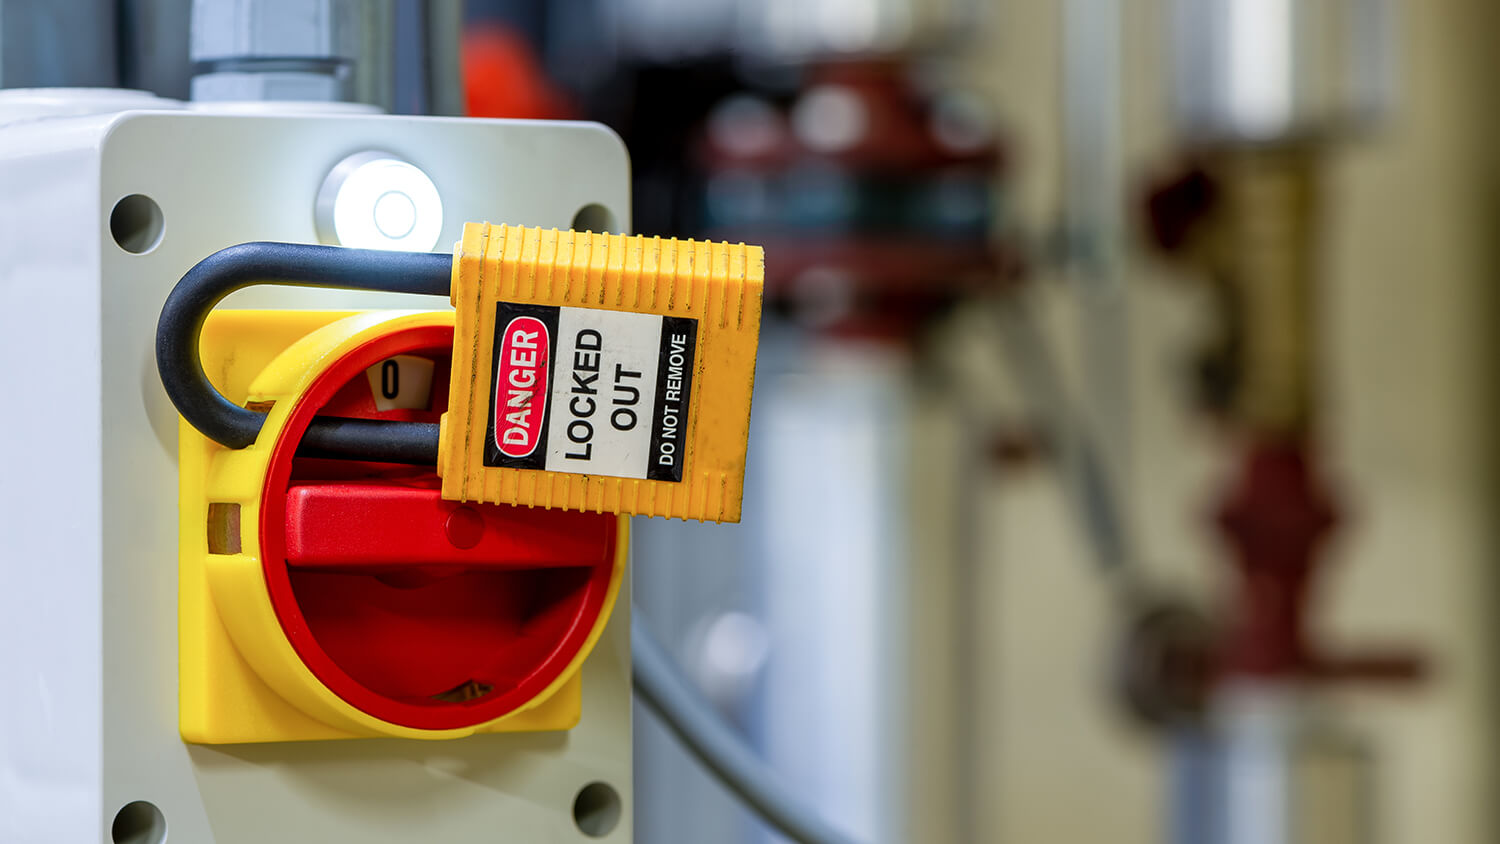 Connected worker tools for safety and lockout tagout (loto) procedures